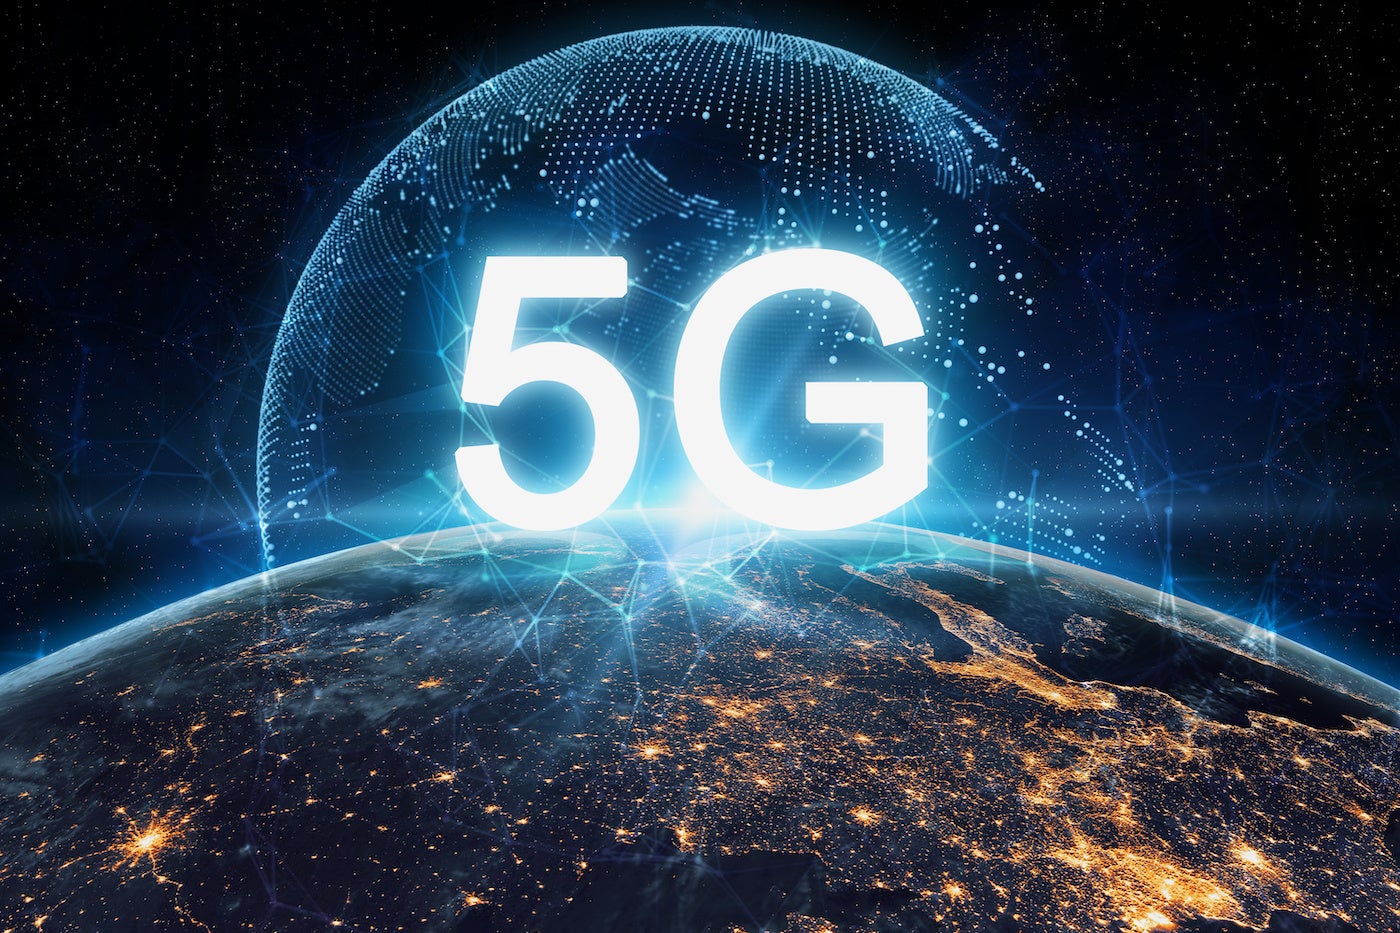 IBM and Nokia announce plans for a private 5G service at MWC 2023